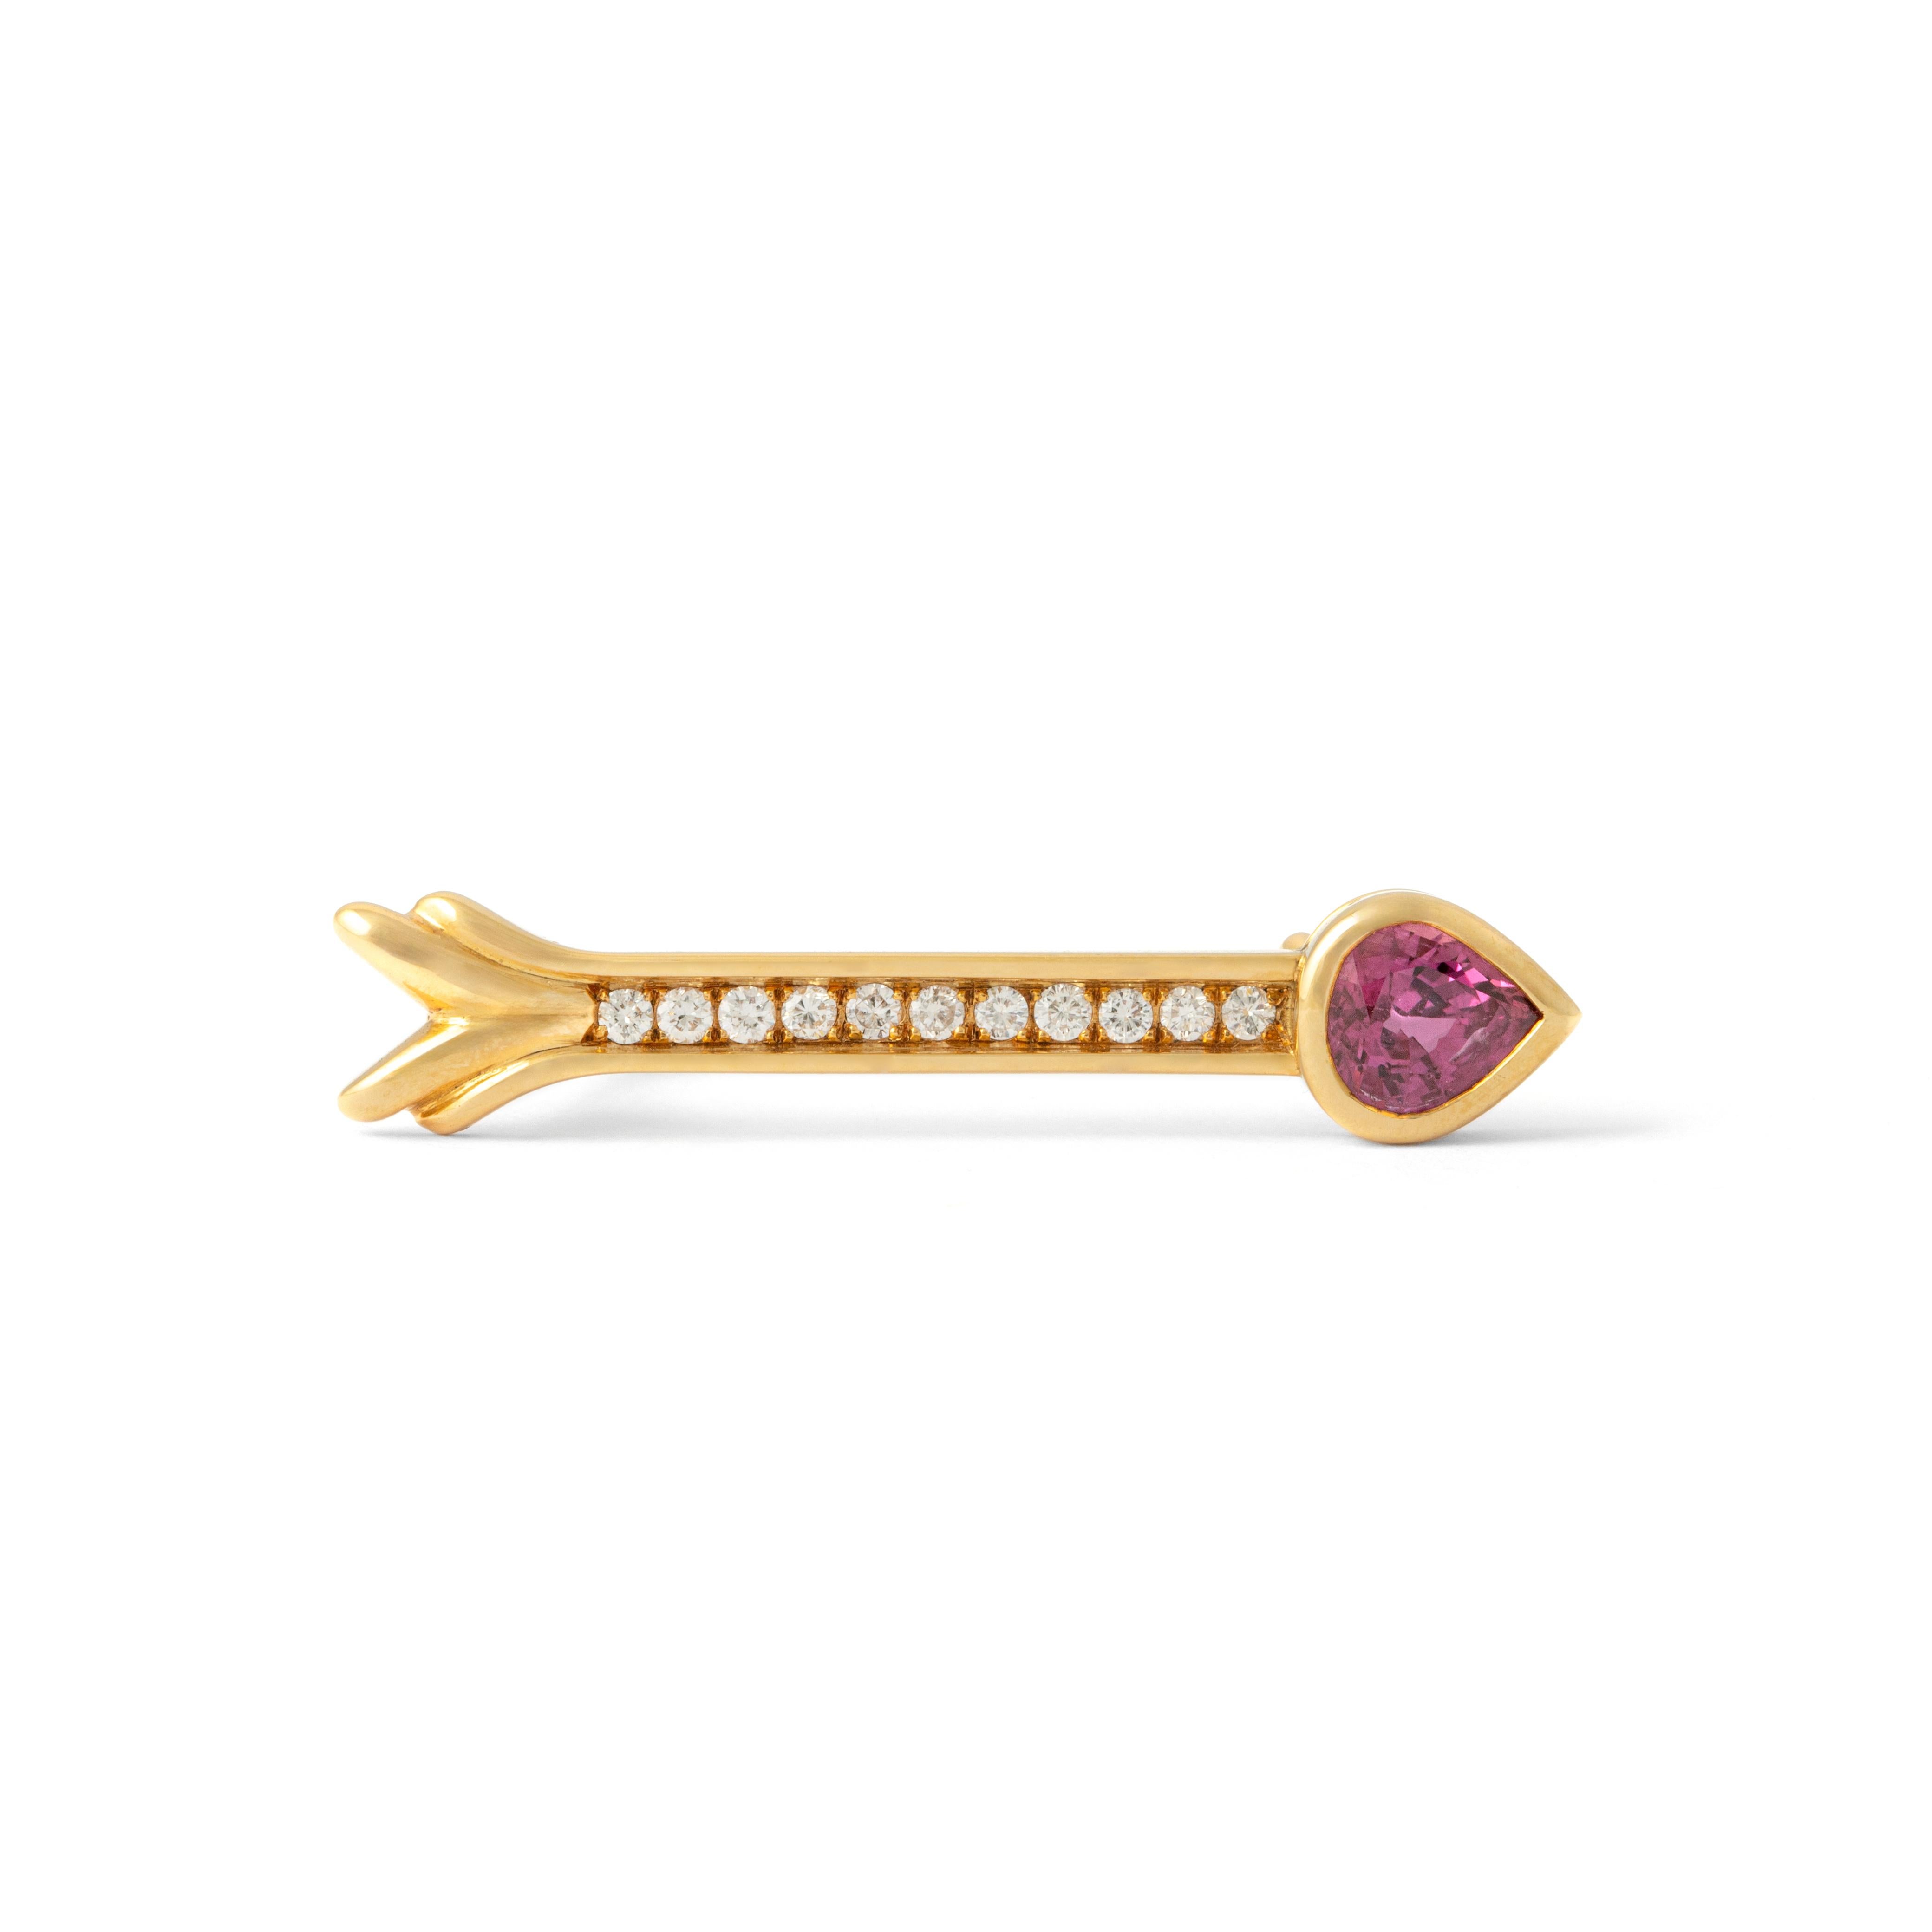 Introducing our Ruby Diamond Yellow Gold 18K Arrow Brooch—a symbol of striking elegance and precision. Crafted with meticulous artistry, this brooch features a vibrant 1.26-carat ruby at its core, exuding passion and intensity.

The arrow’s shaft is